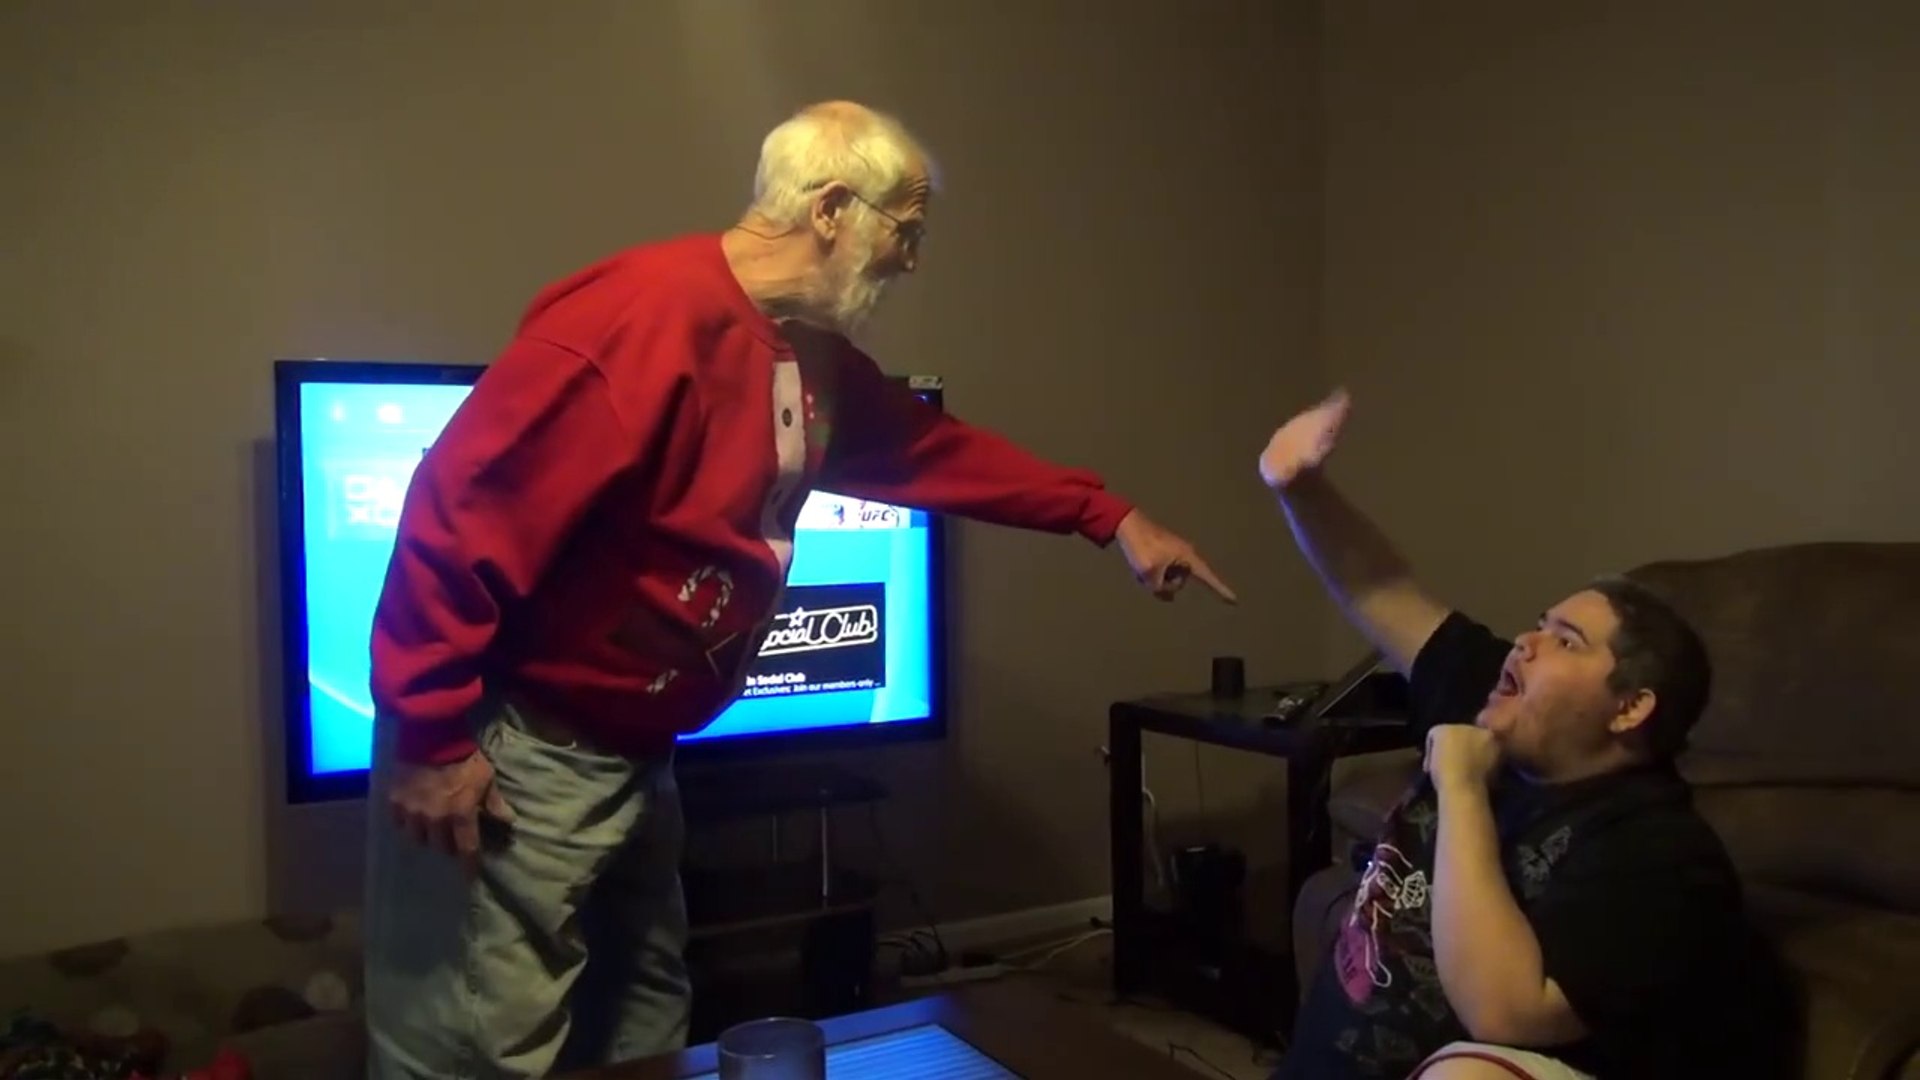 ANGRY GRANDPA DESTROYS PS4! - video Dailymotion